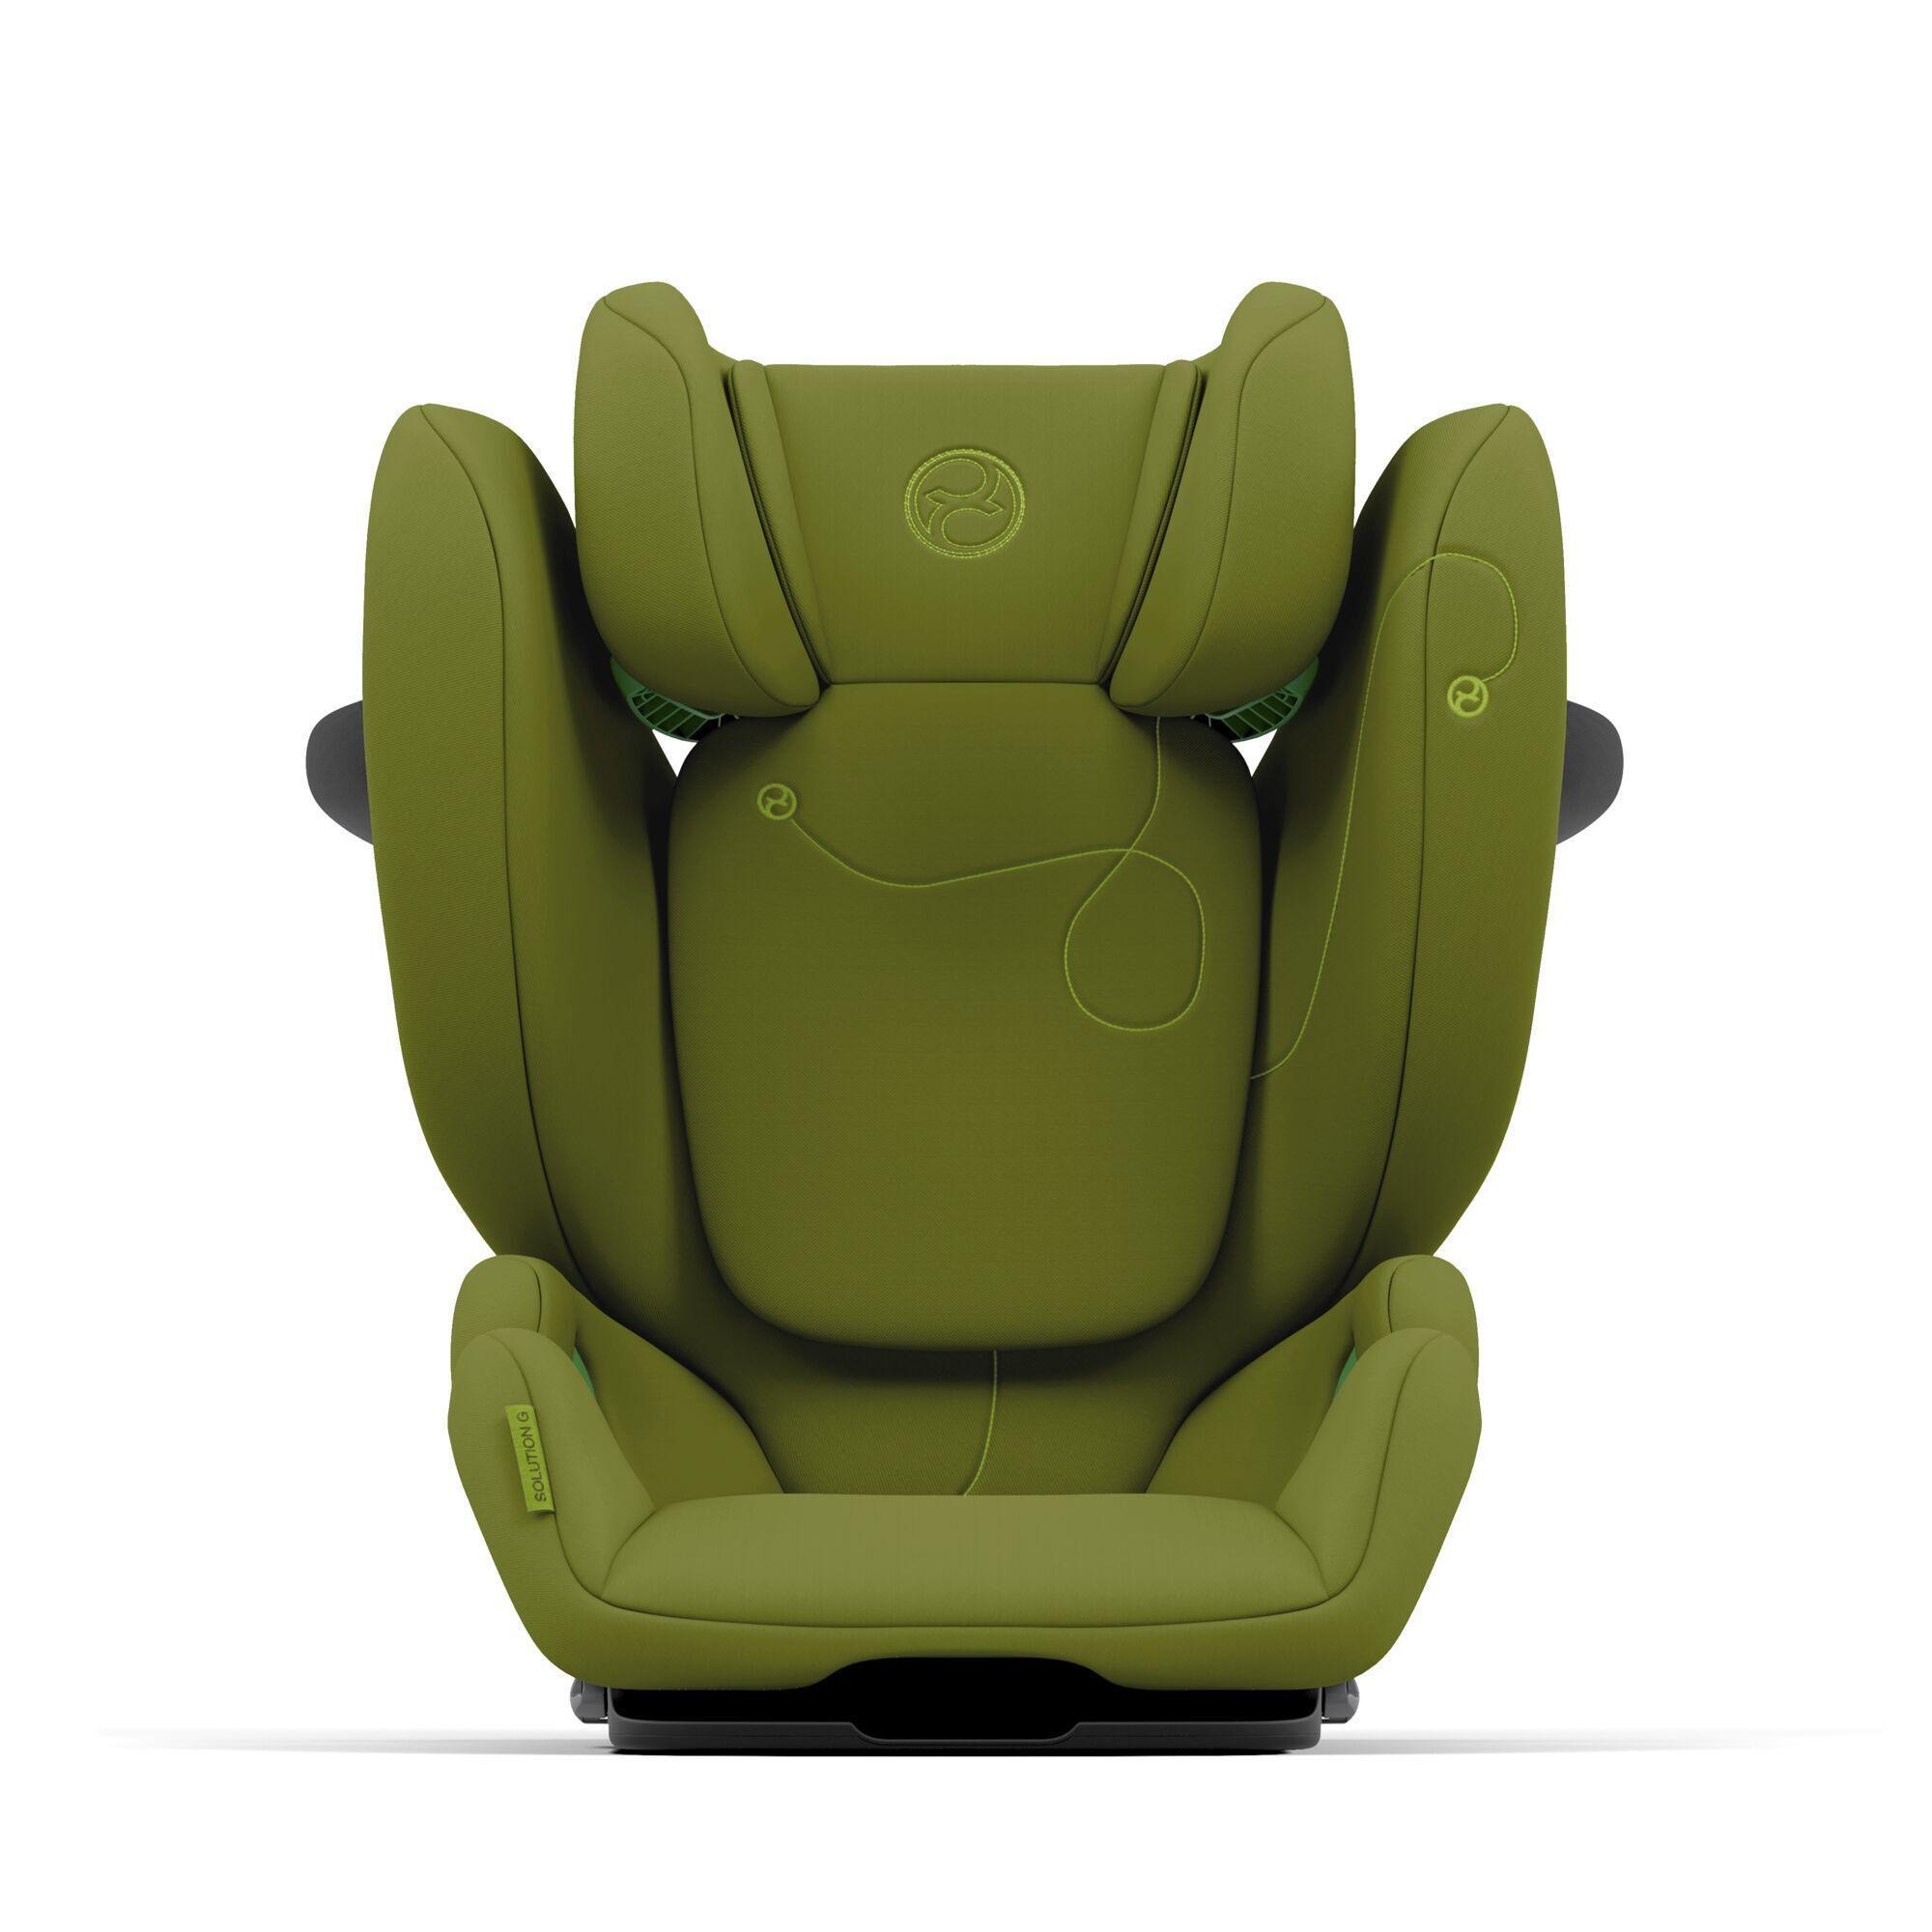 https://www.nordbaby.com/products/images/g120000/128572/car-seats-15-36kg-cybex-nature-green-cybex-solution-g-i-fix-car-seat-100-150cm-nature-green-128572-68570.jpg